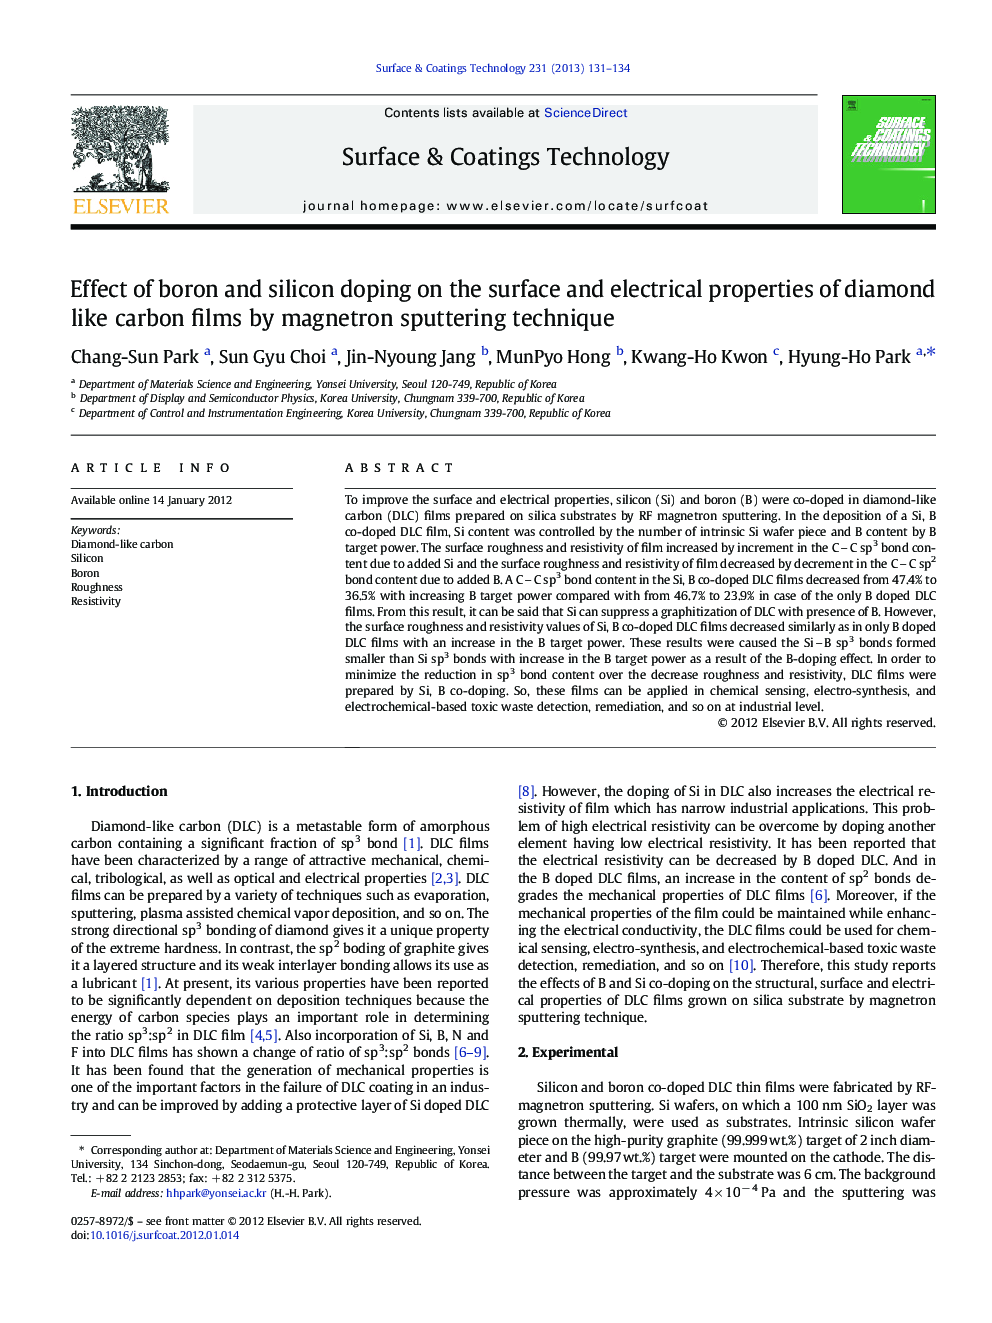 Effect of boron and silicon doping on the surface and electrical properties of diamond like carbon films by magnetron sputtering technique